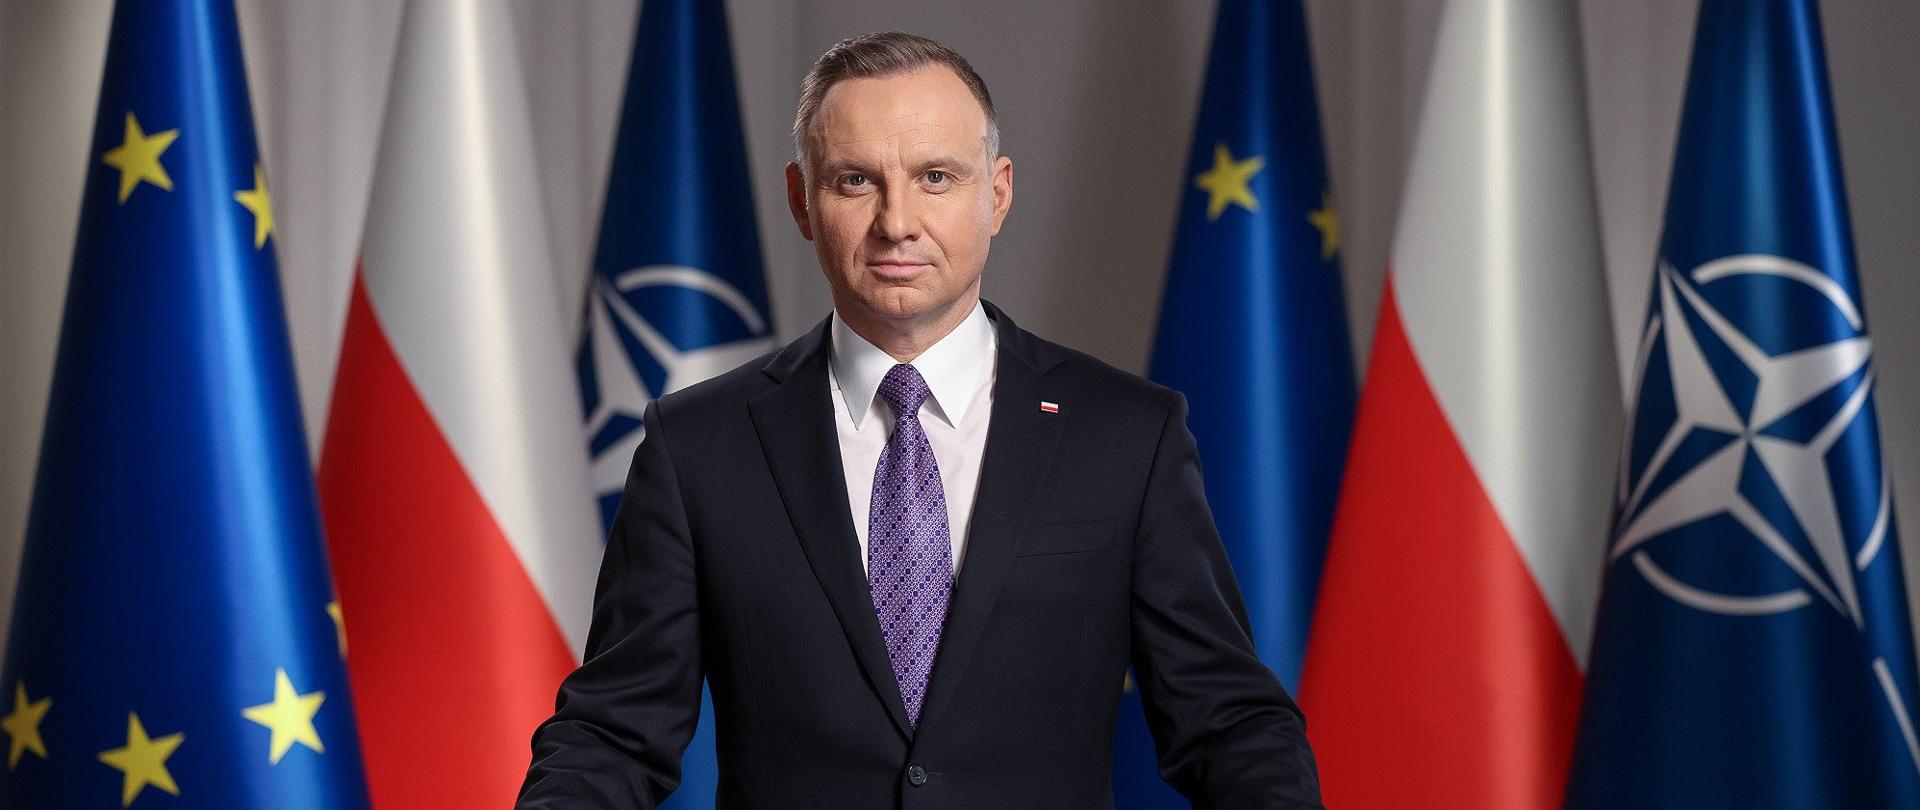 Katowice sends a message to the world”, President Duda declares